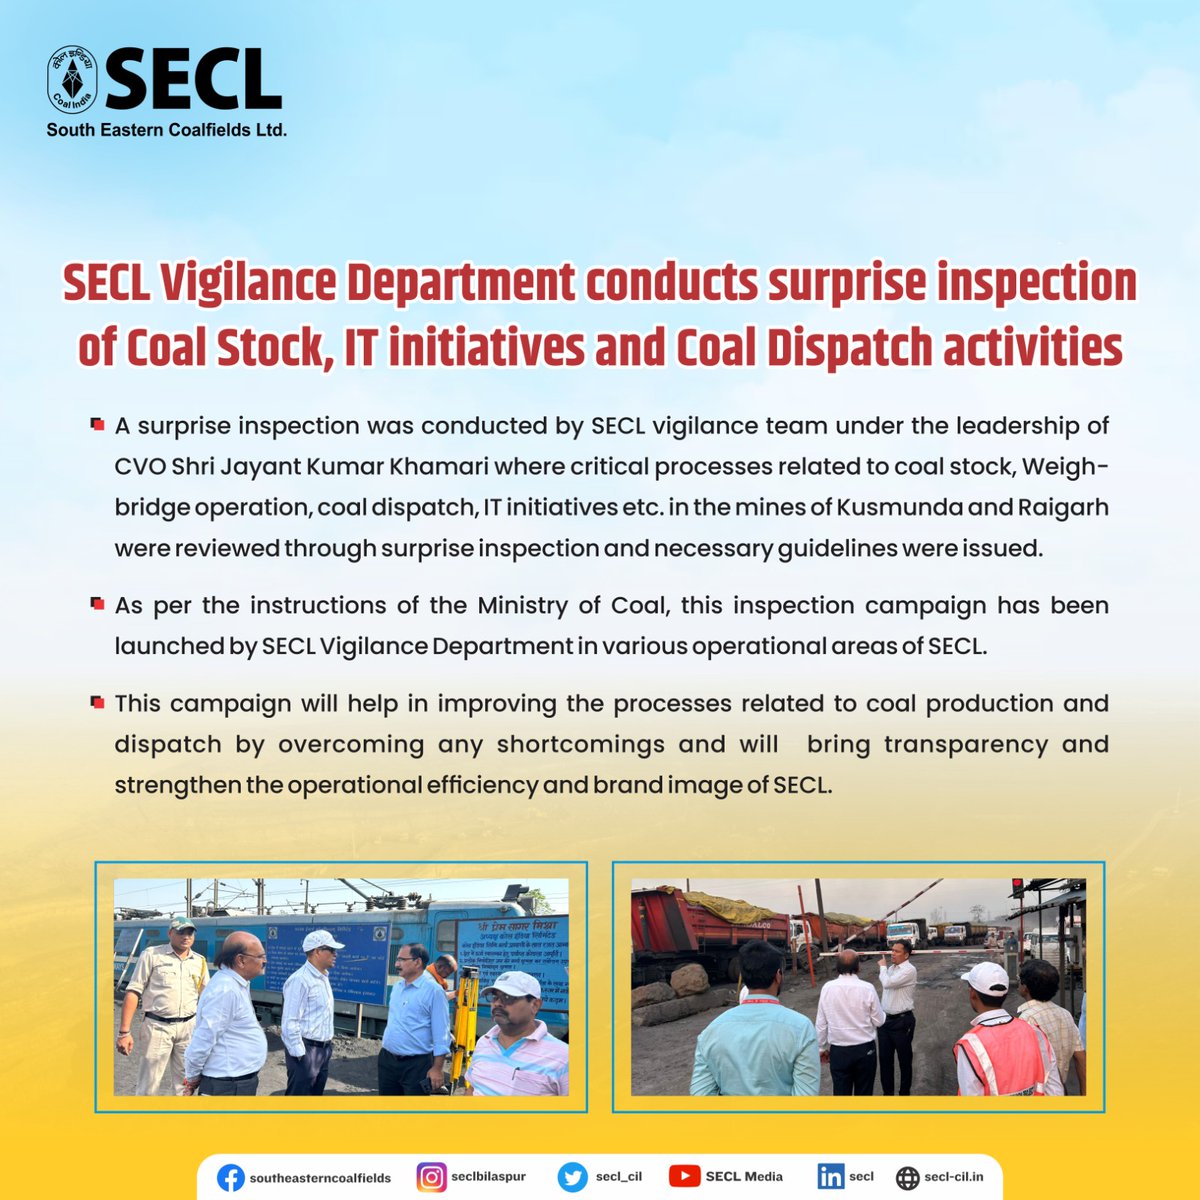 SECL Vigilance Dept. initiates inspection campaign in SECL mines. Team led by CVO Shri Jayant Kumar Khamari conducts surprise inspection in mines, reviews coal stock and coal measurement processes, and implementation of IT solutions. 
@CoalMinistry @CoalIndiaHQ @CVCIndia